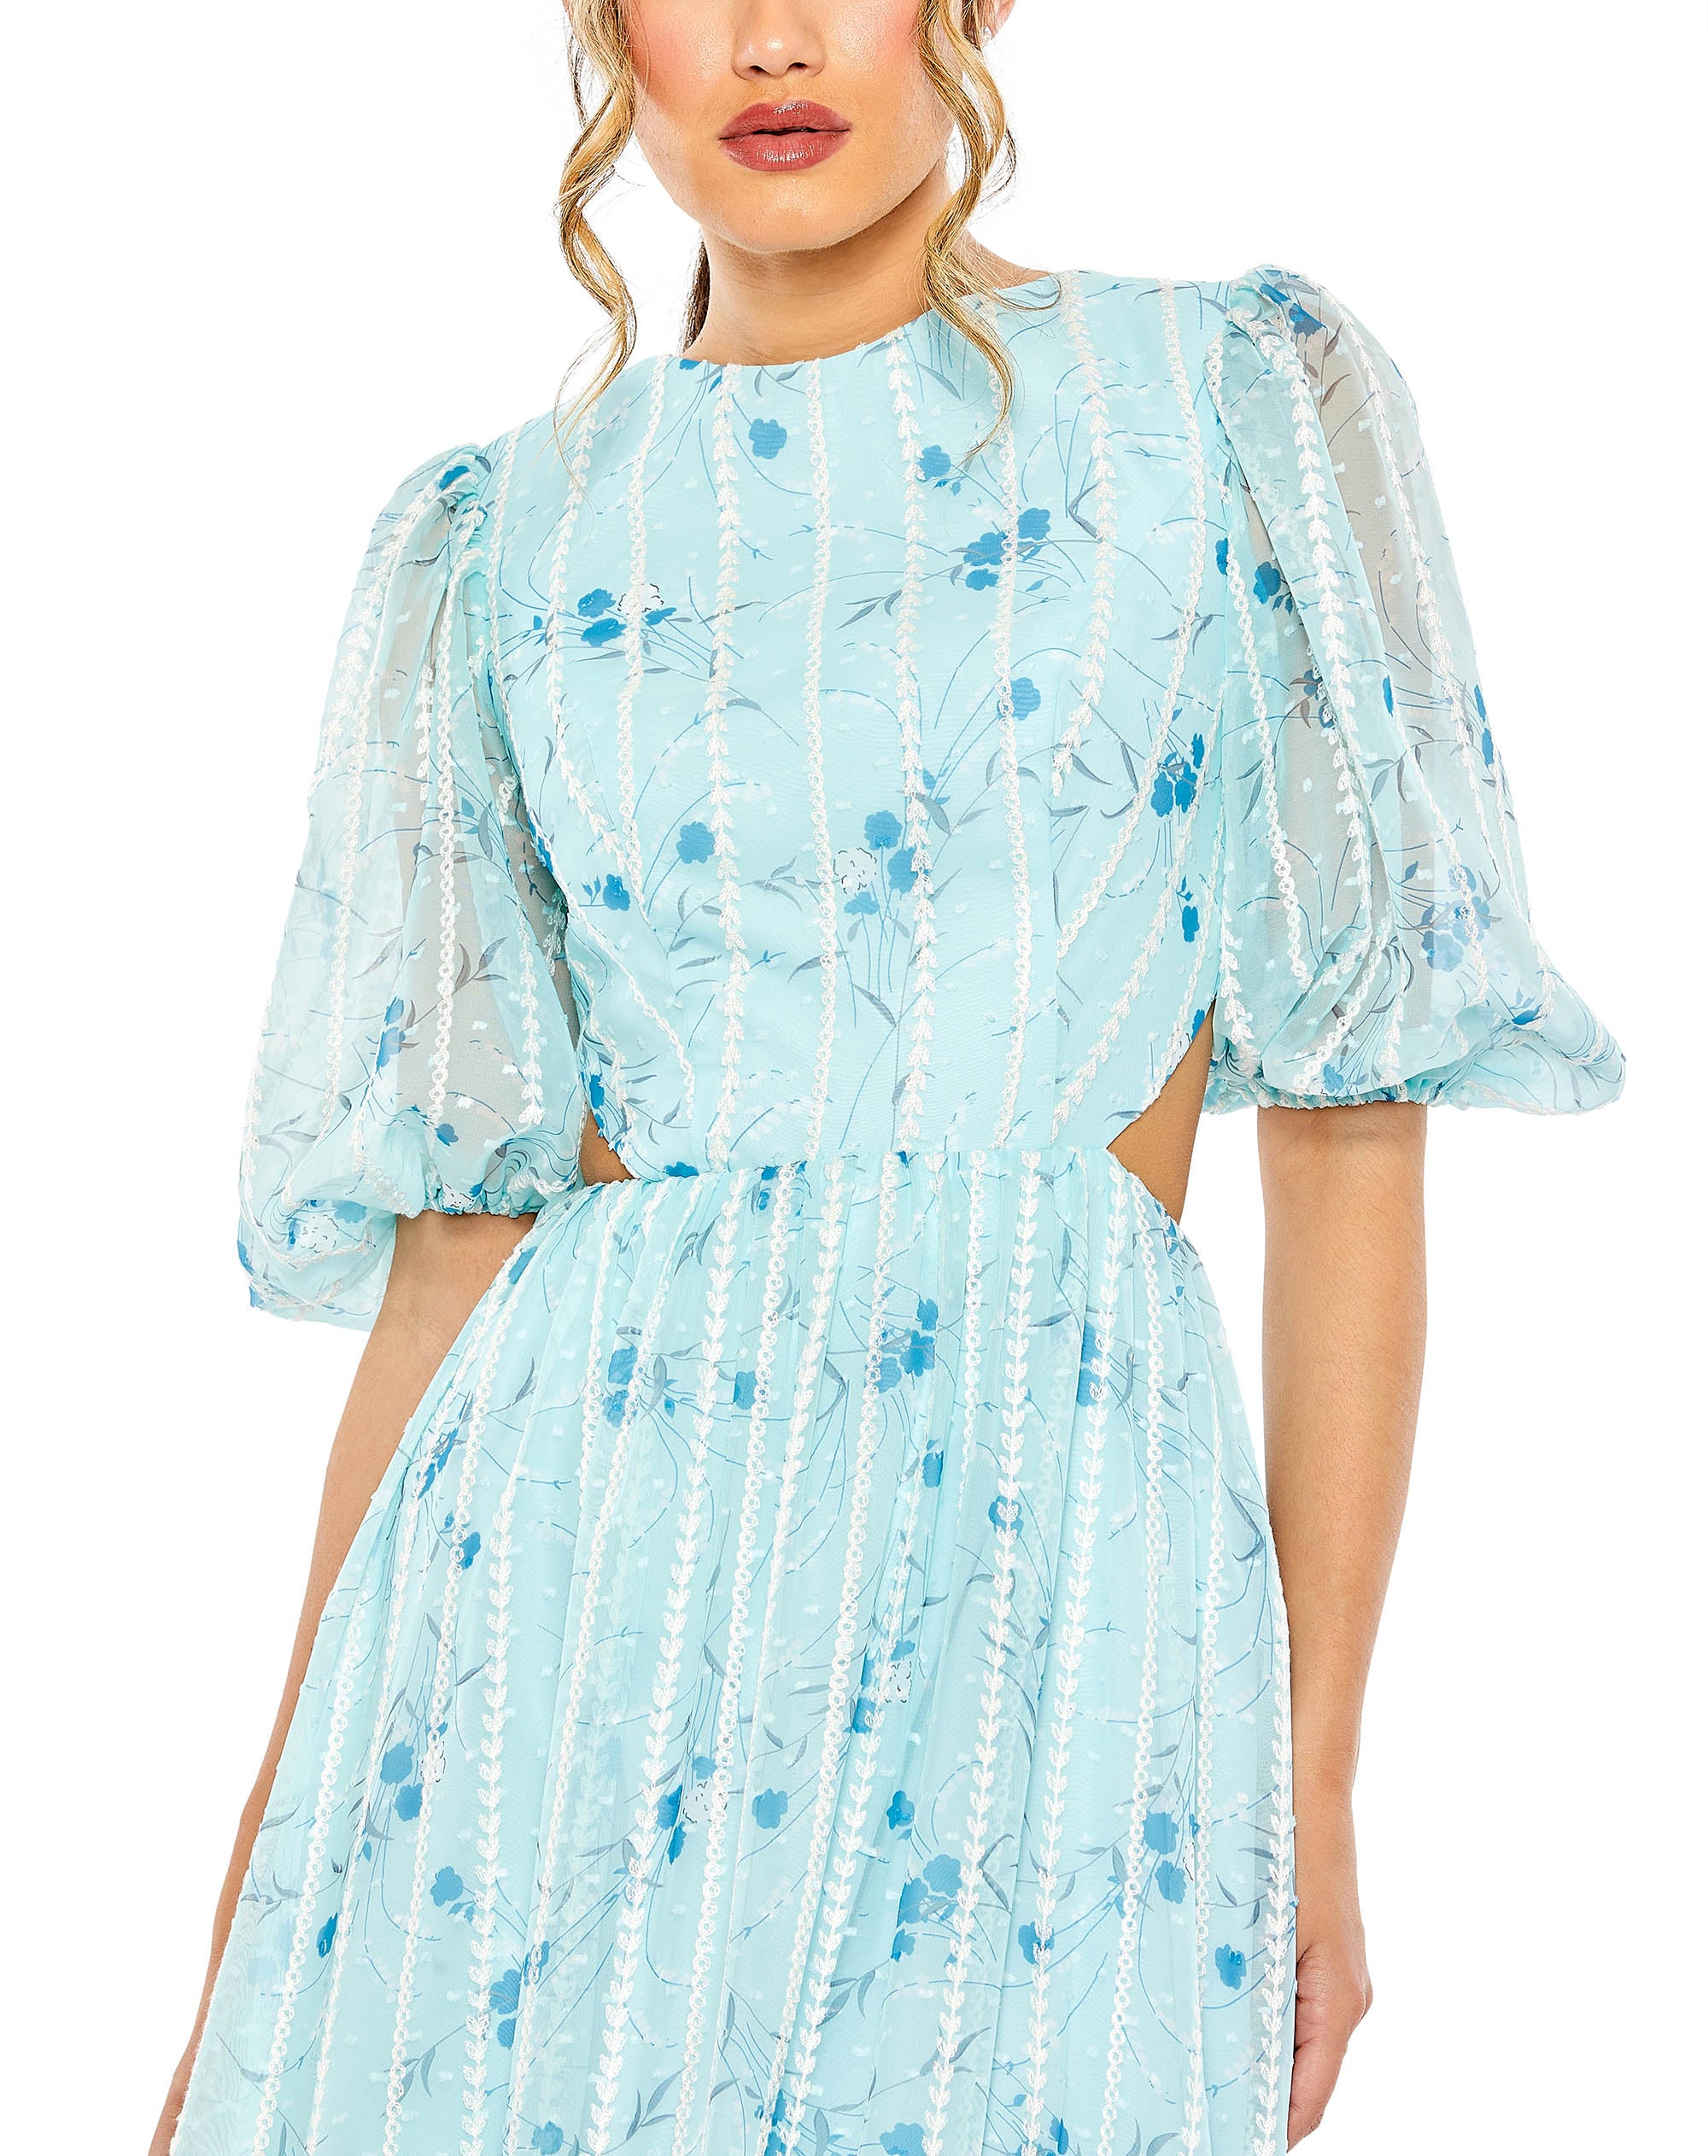 Lace Up Puff Sleeve Floral Dress